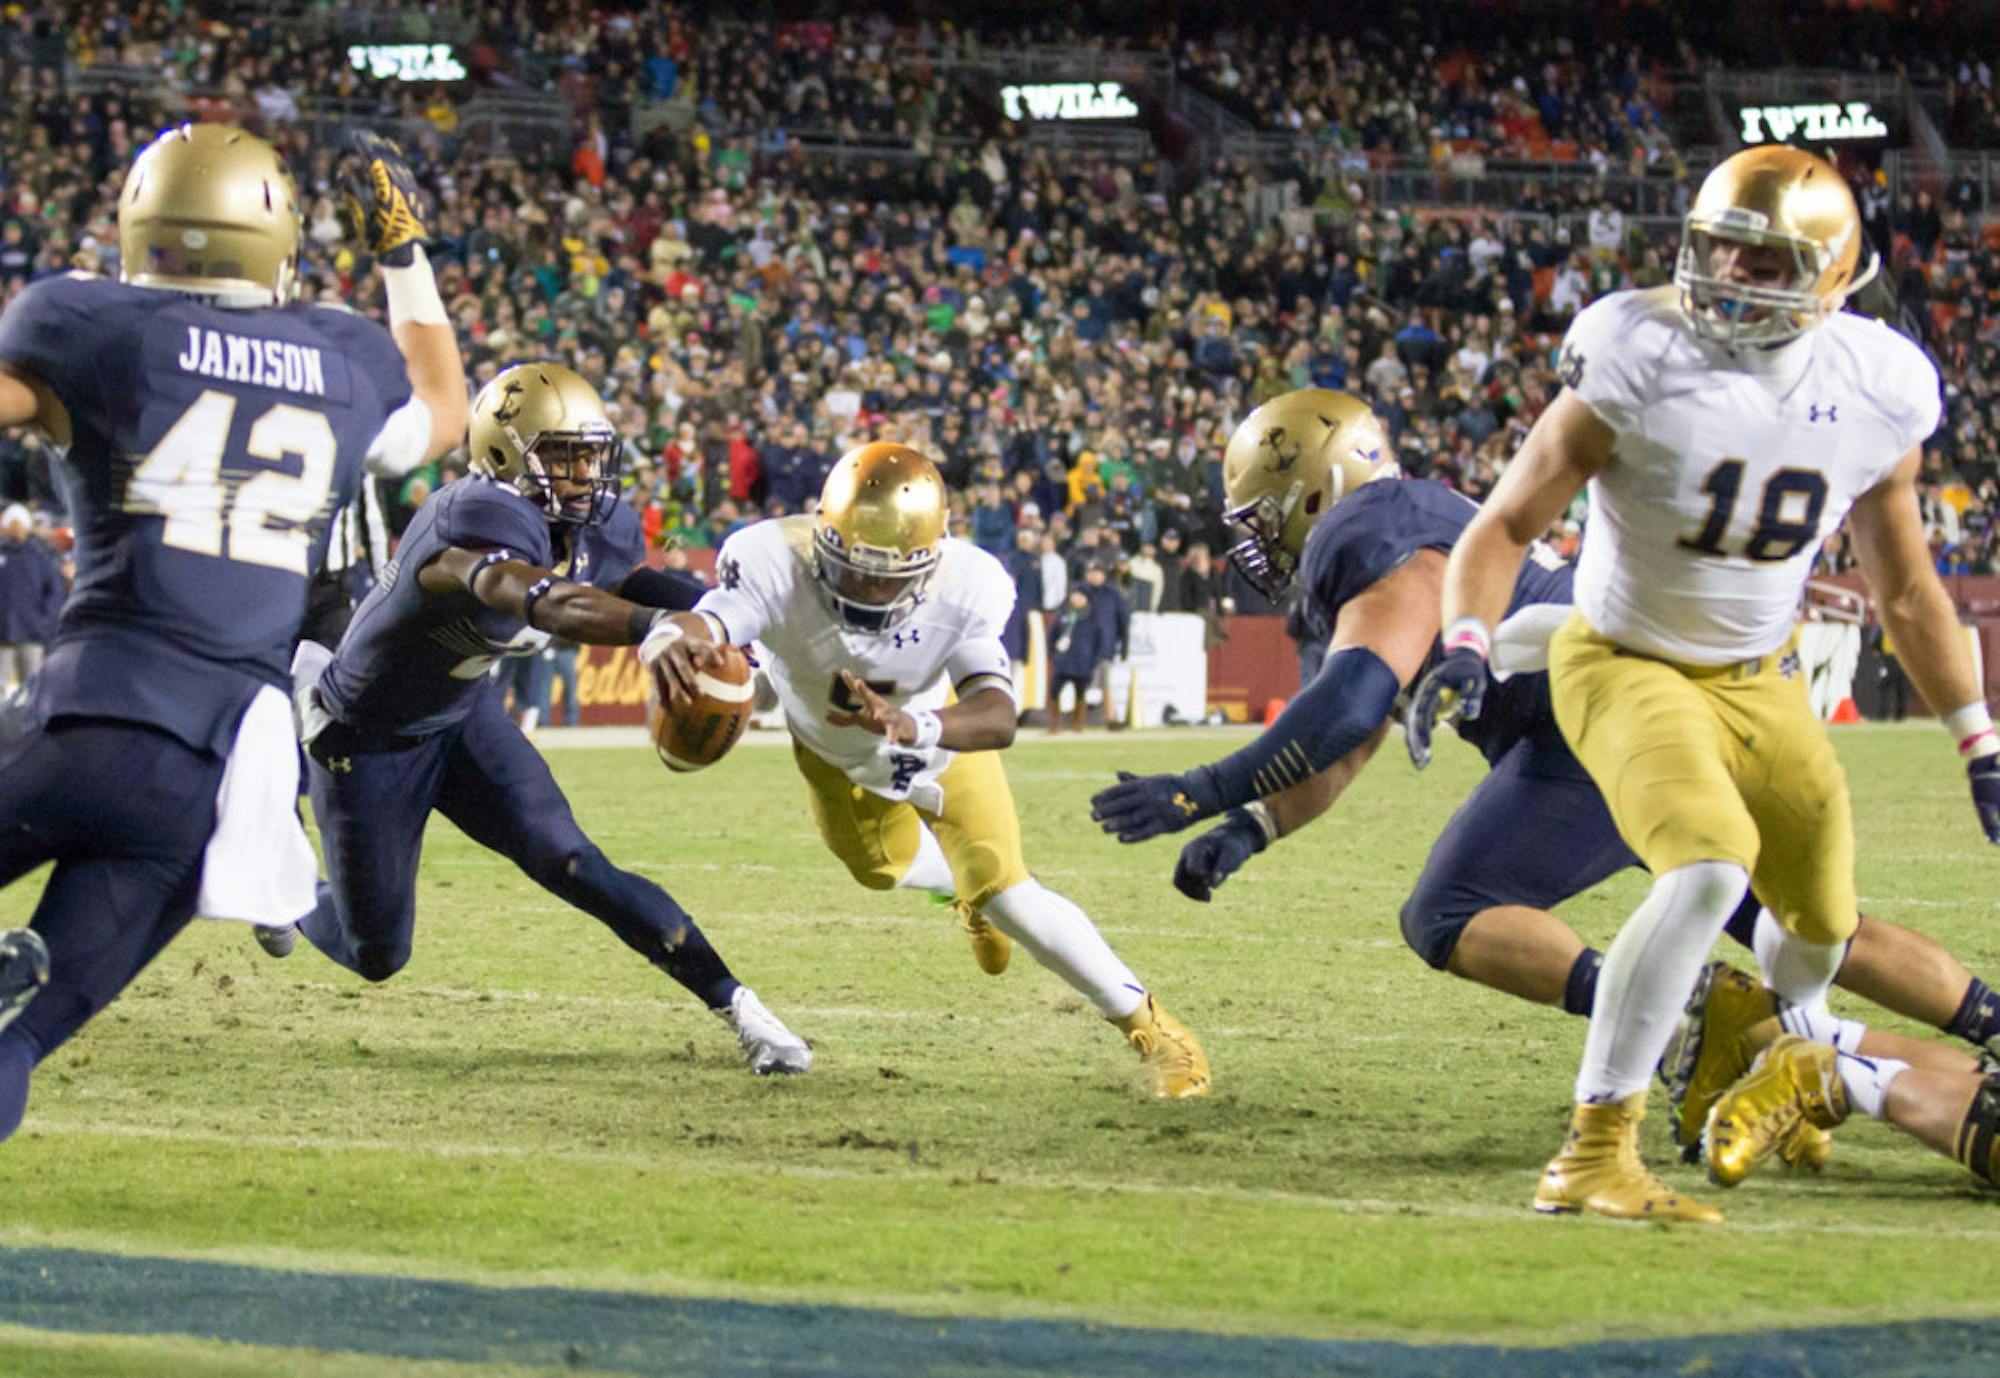 Irish senior quarterback Everett Golson dives forward for a fourth-quarter rushing touchdown to put Notre Dame back ahead en route to its 49-39 win over Navy on Saturday in Landover, Maryland.